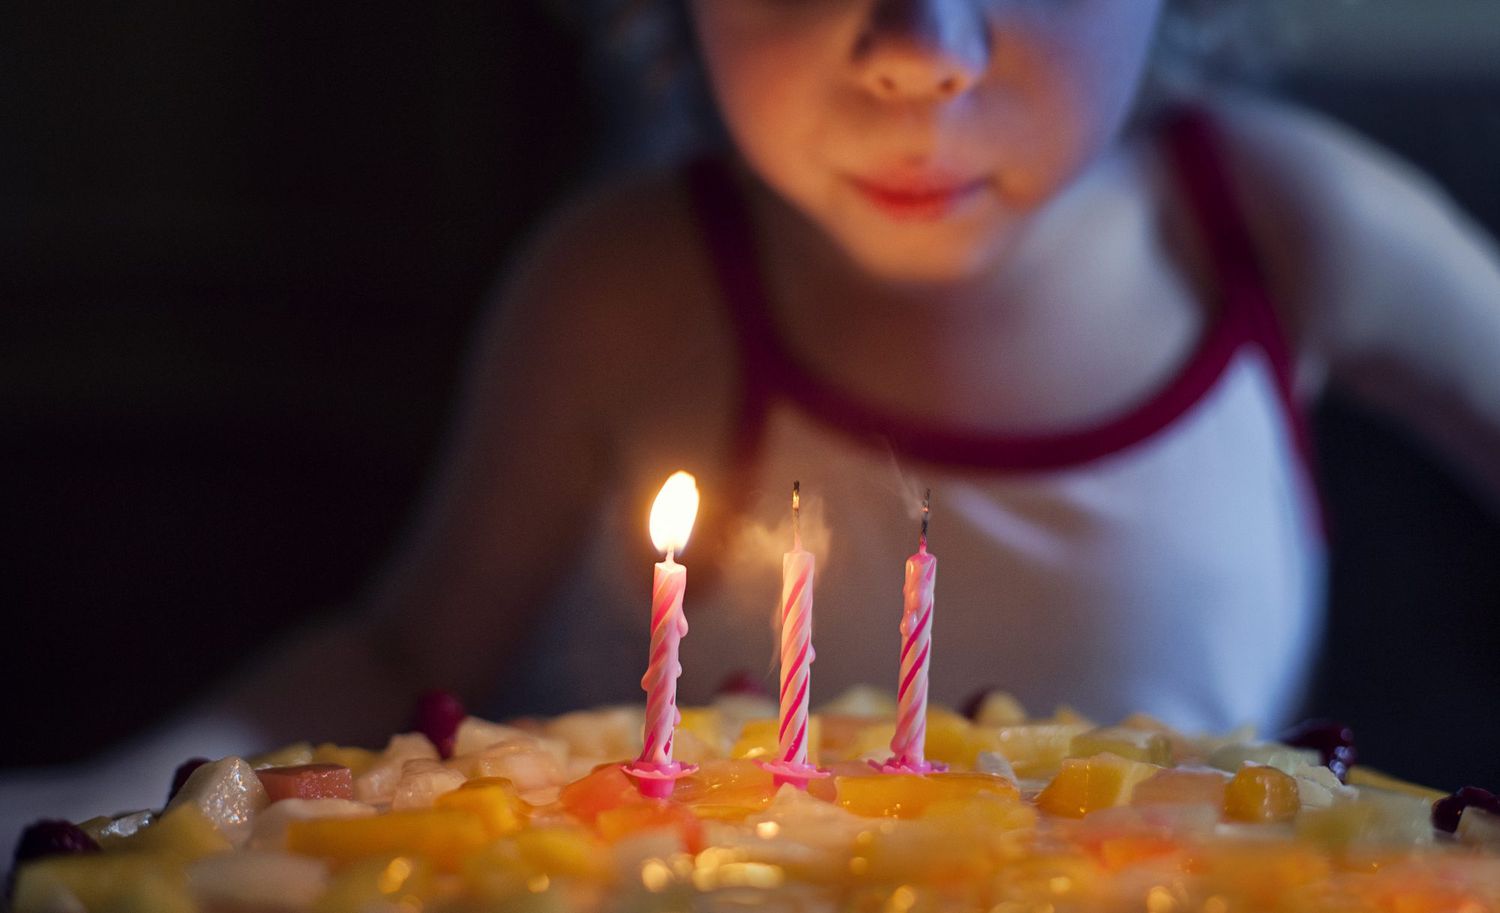 An image of a girl blowing out candles on her birthday cake.